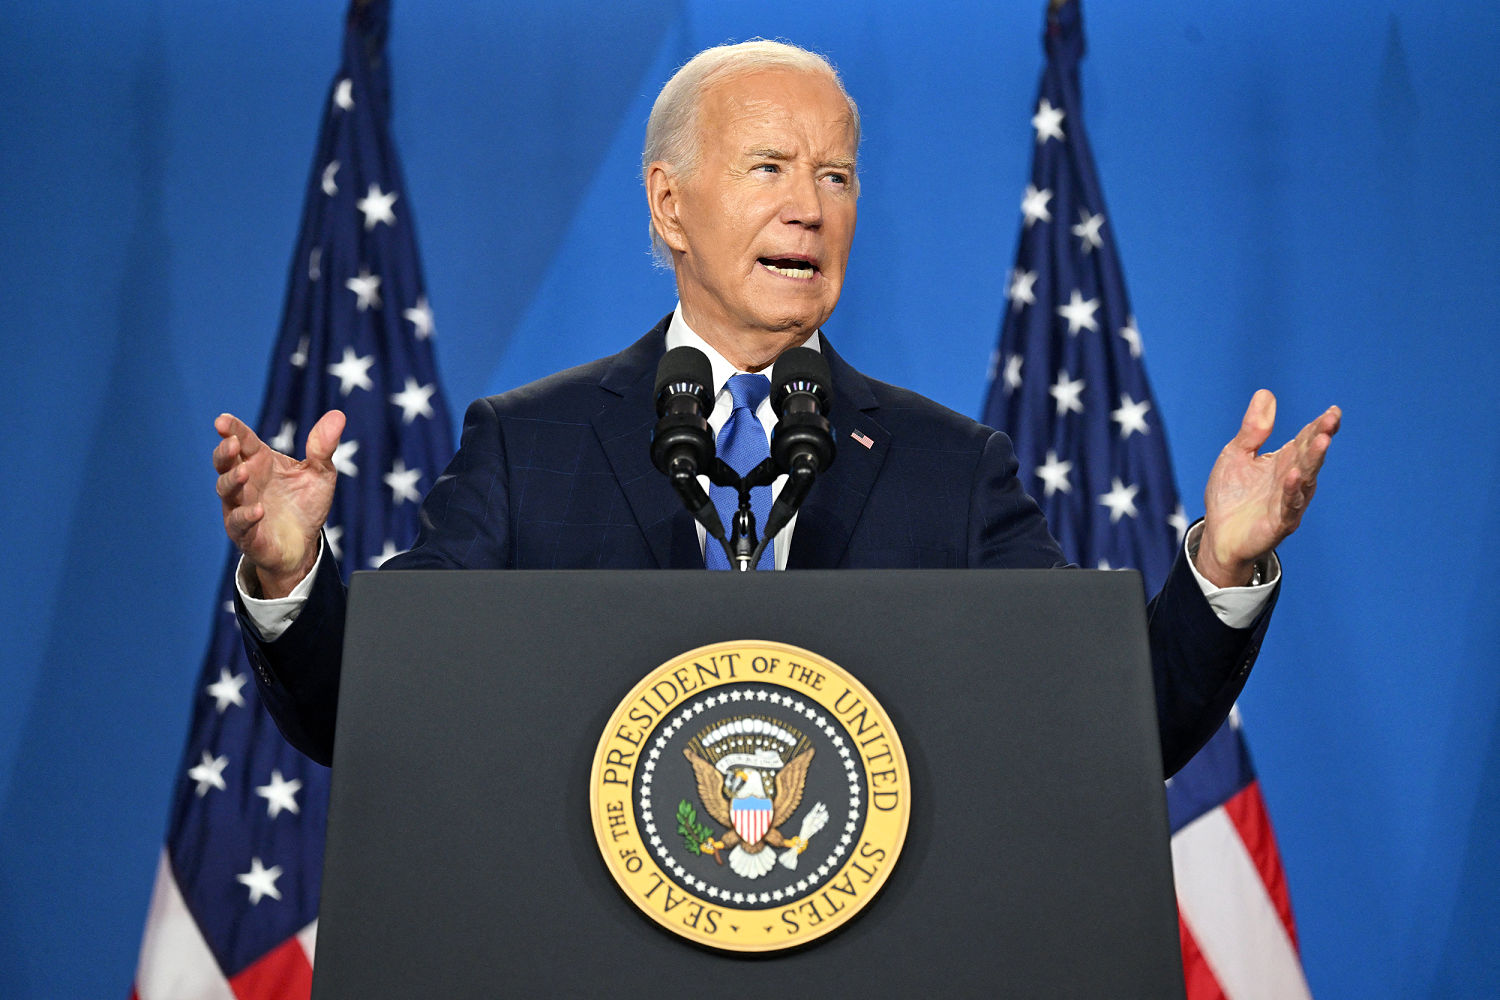 Biden expounds on policy while his party frets over his delivery